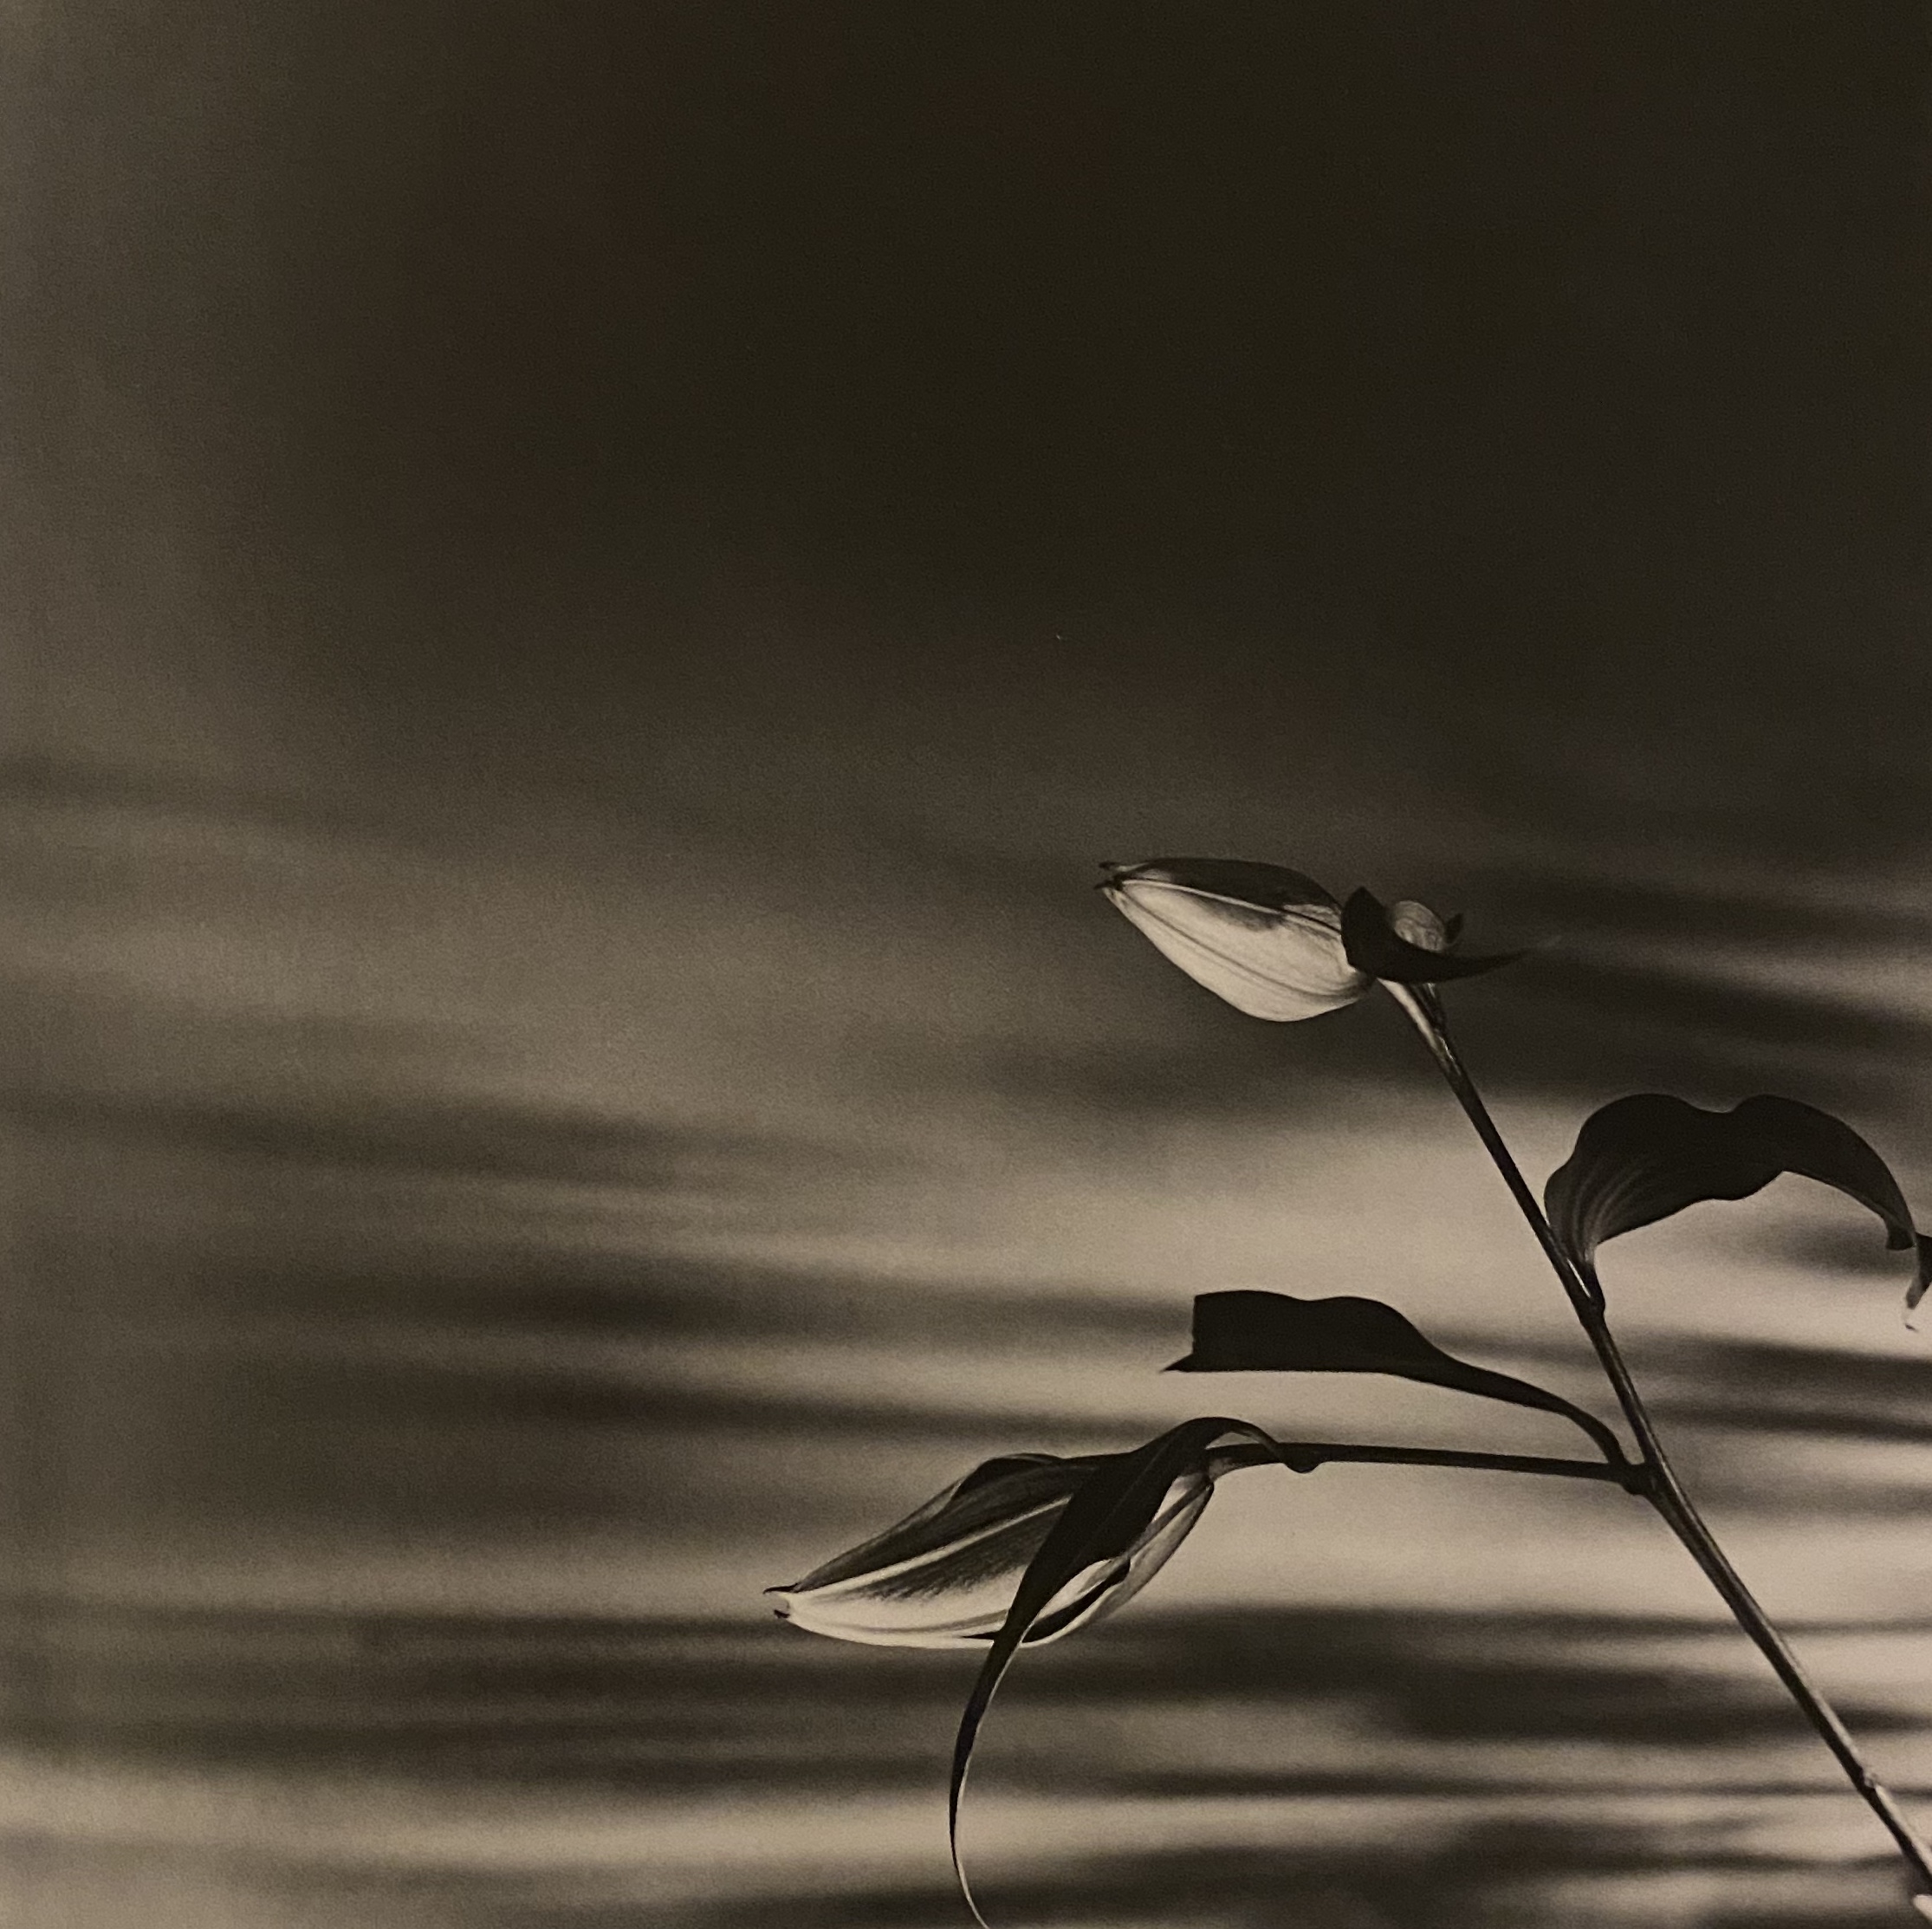 Two lillies in the bottom right corner, on a scrunched up cloth background